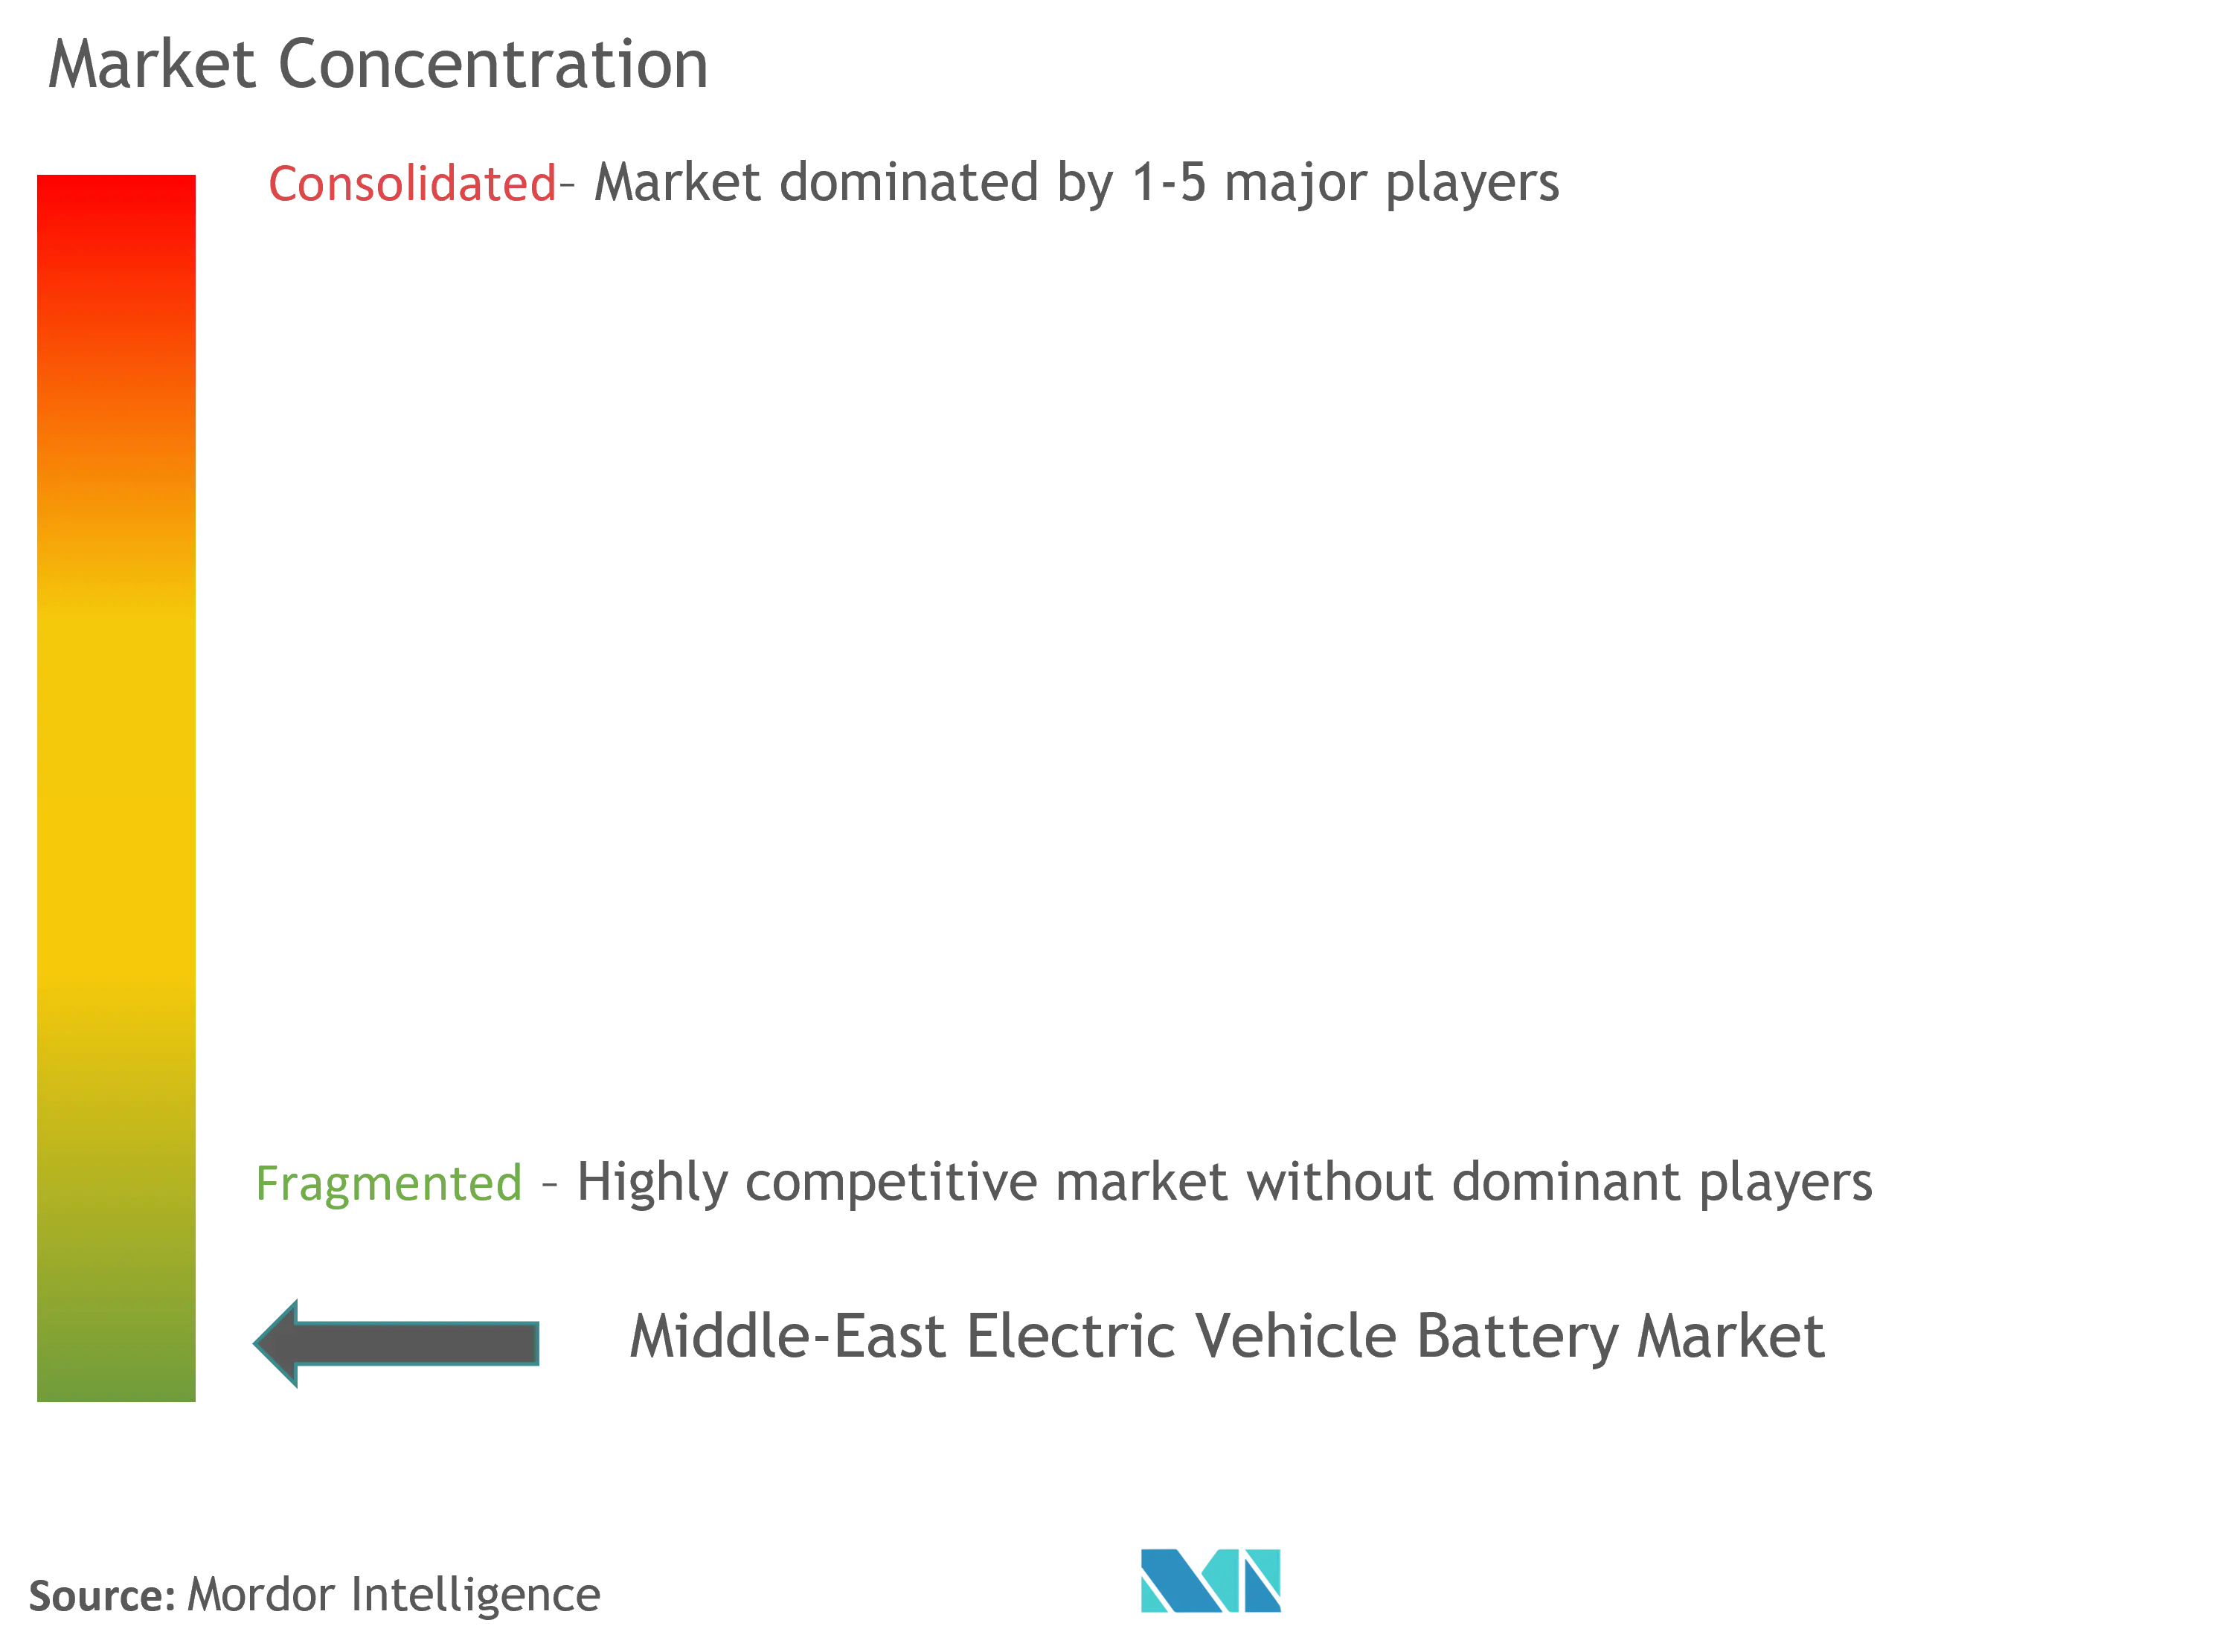 Middle-East Electric Vehicle Battery Market  Concentration